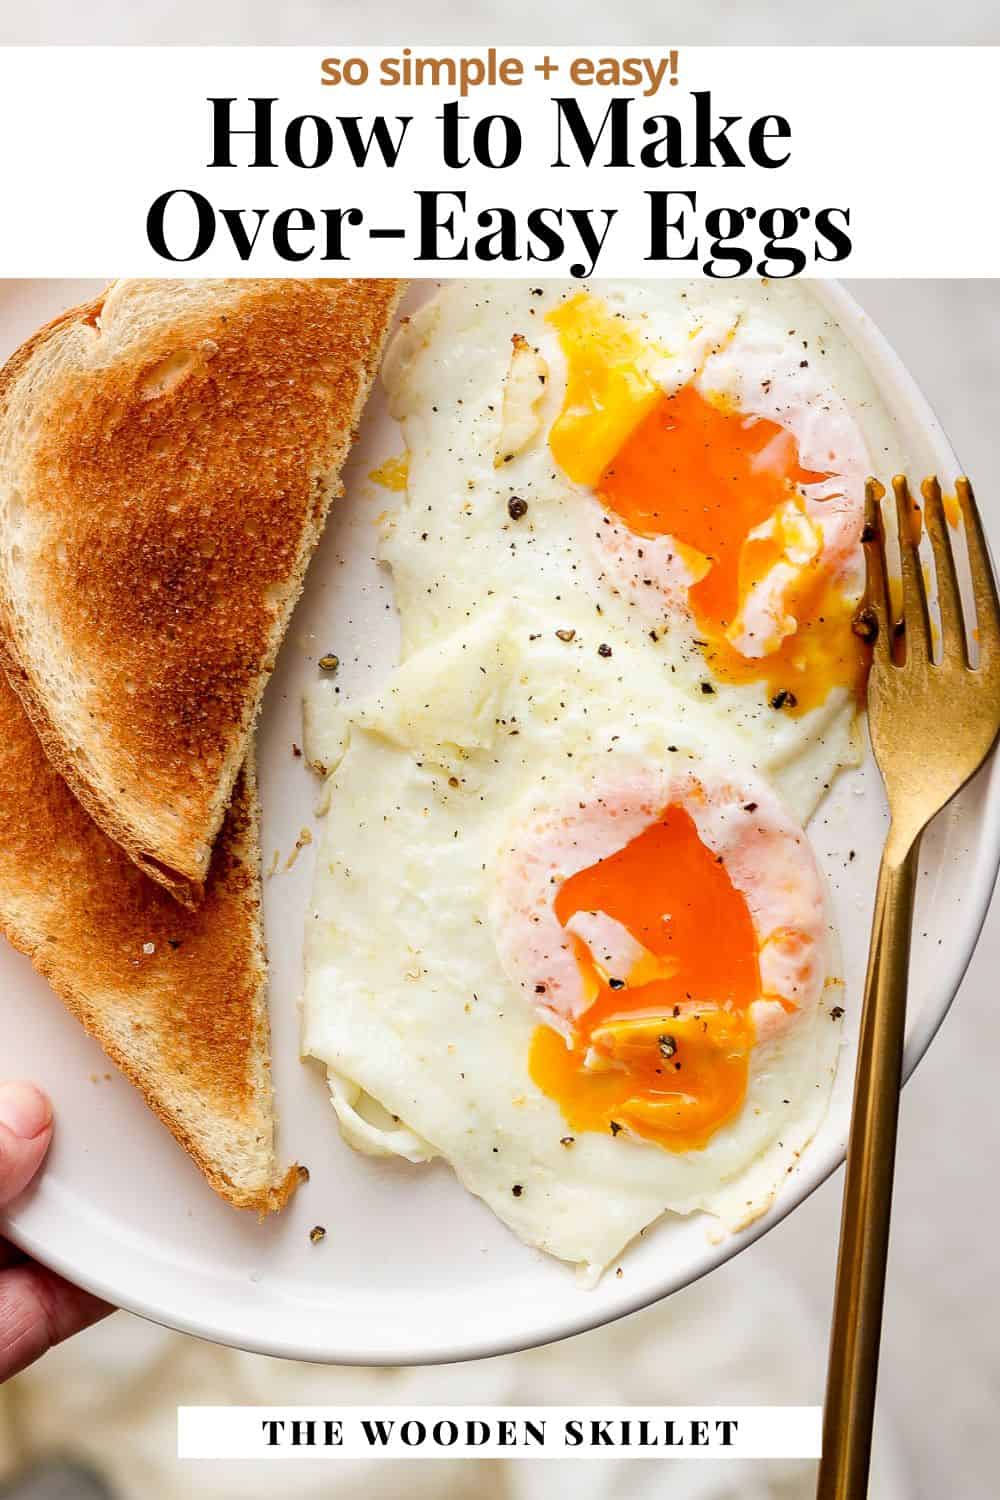 Pinterest image showing a plate of two eggs over easy with two slices of toast with the title "how to make over-easy eggs. so simple + easy."